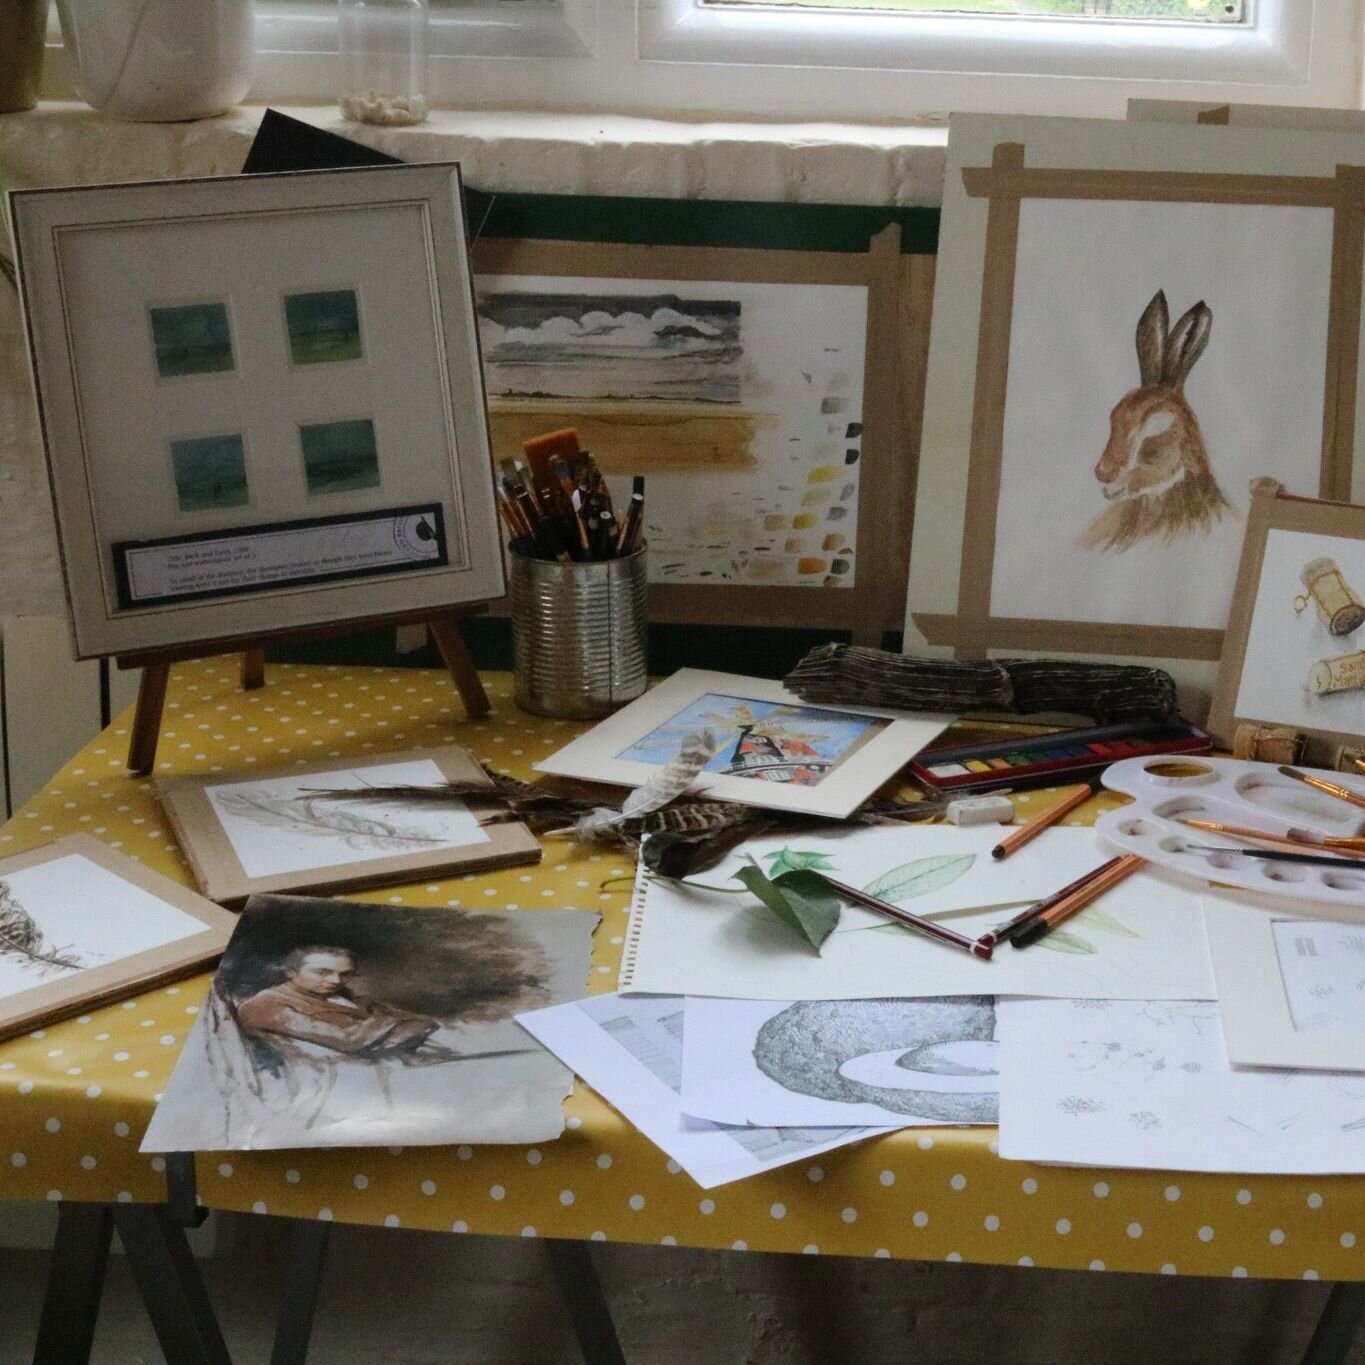 Sara's next Beginners Art Course starts on June 7th.
During the last 6 sessions of Beginners Art the artwork produced has been fantastic.  The group have discovered that they CAN draw!  They now have a growing self belief &amp; confidence in their ab